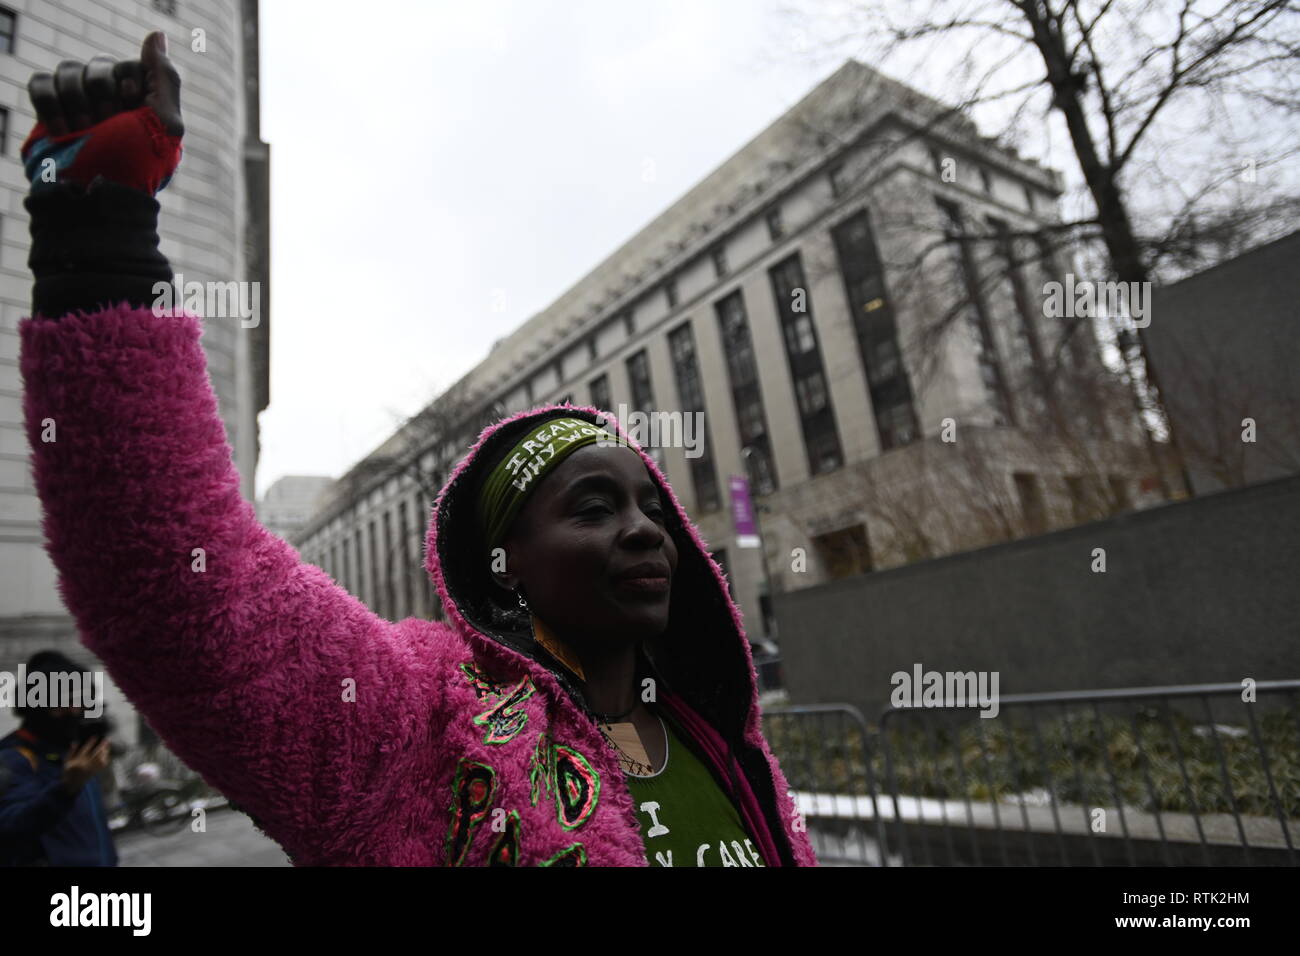 New York, NY, USA. 1 March 2019 New York US Statue of Liberty climber Patricia Okoumou walks into court for a hearing on whether her bail would be revoked after she was arrested for climbing a school for immigrant children in Austin, Texas, in another act of civil disobedience to protest against Trump administration immigration policies.  A magistrate judge later ordered her confined to her home with electronic monitoring before sentencing March 19 for climbing the statue. Credit: Joseph Reid/Alamy Live News Stock Photo